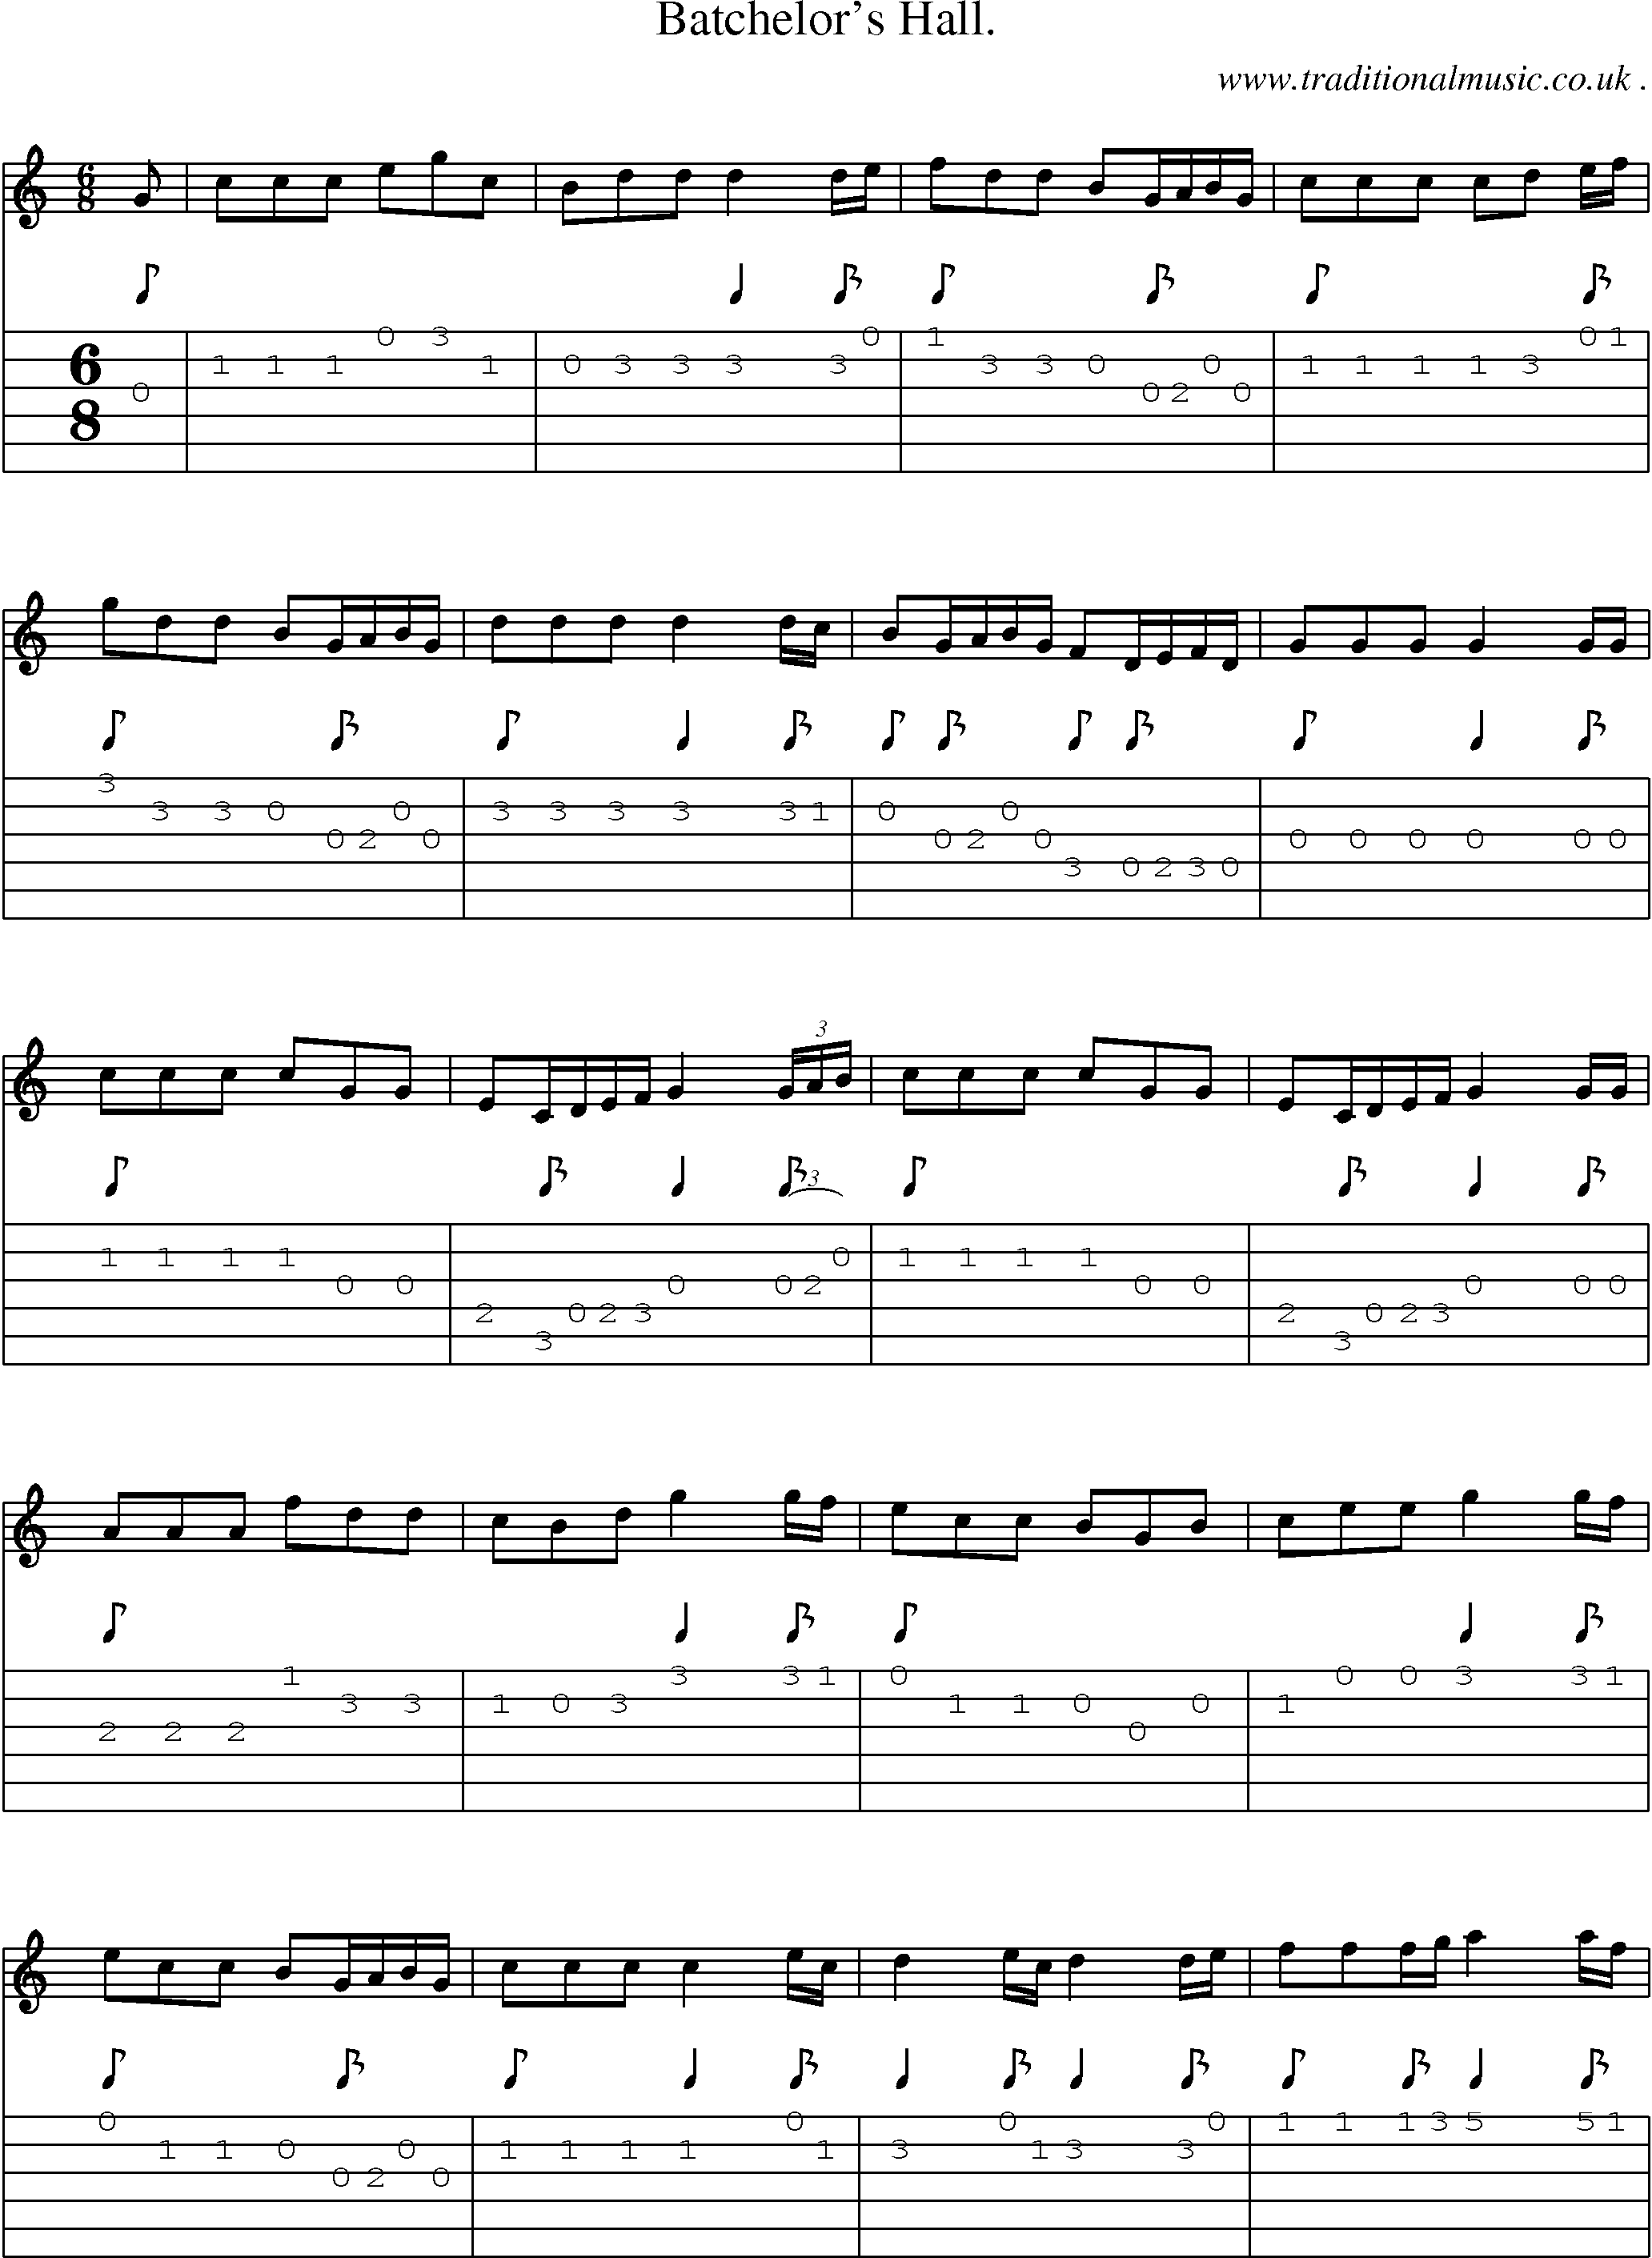 Sheet-Music and Guitar Tabs for Batchelors Hall